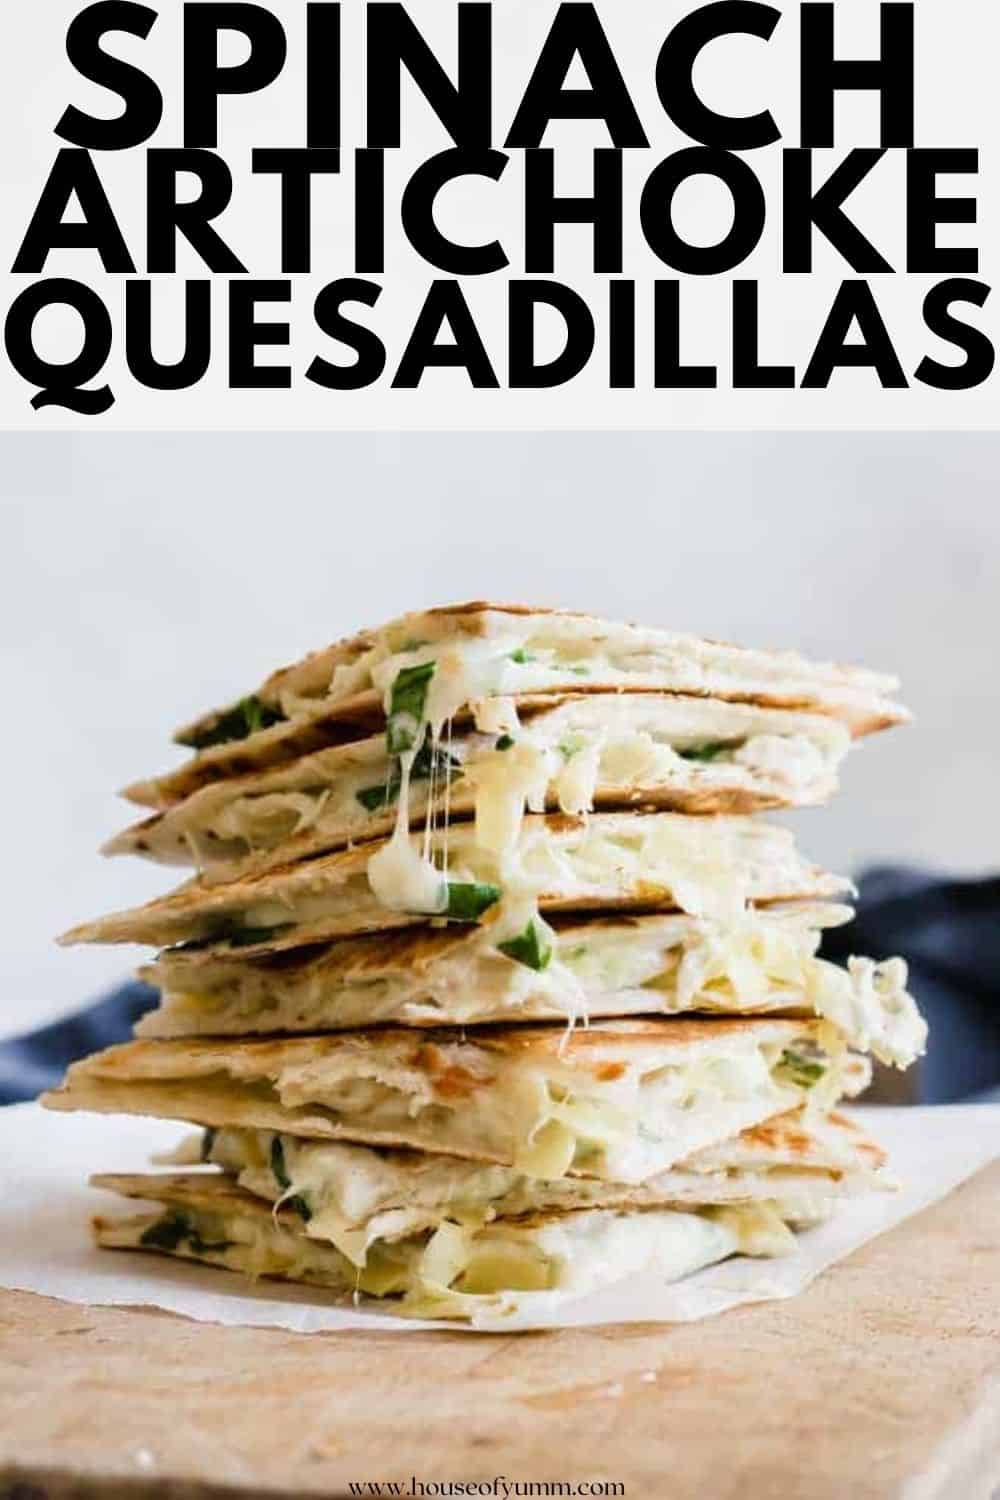 Spinach artichoke quesadillas with text.